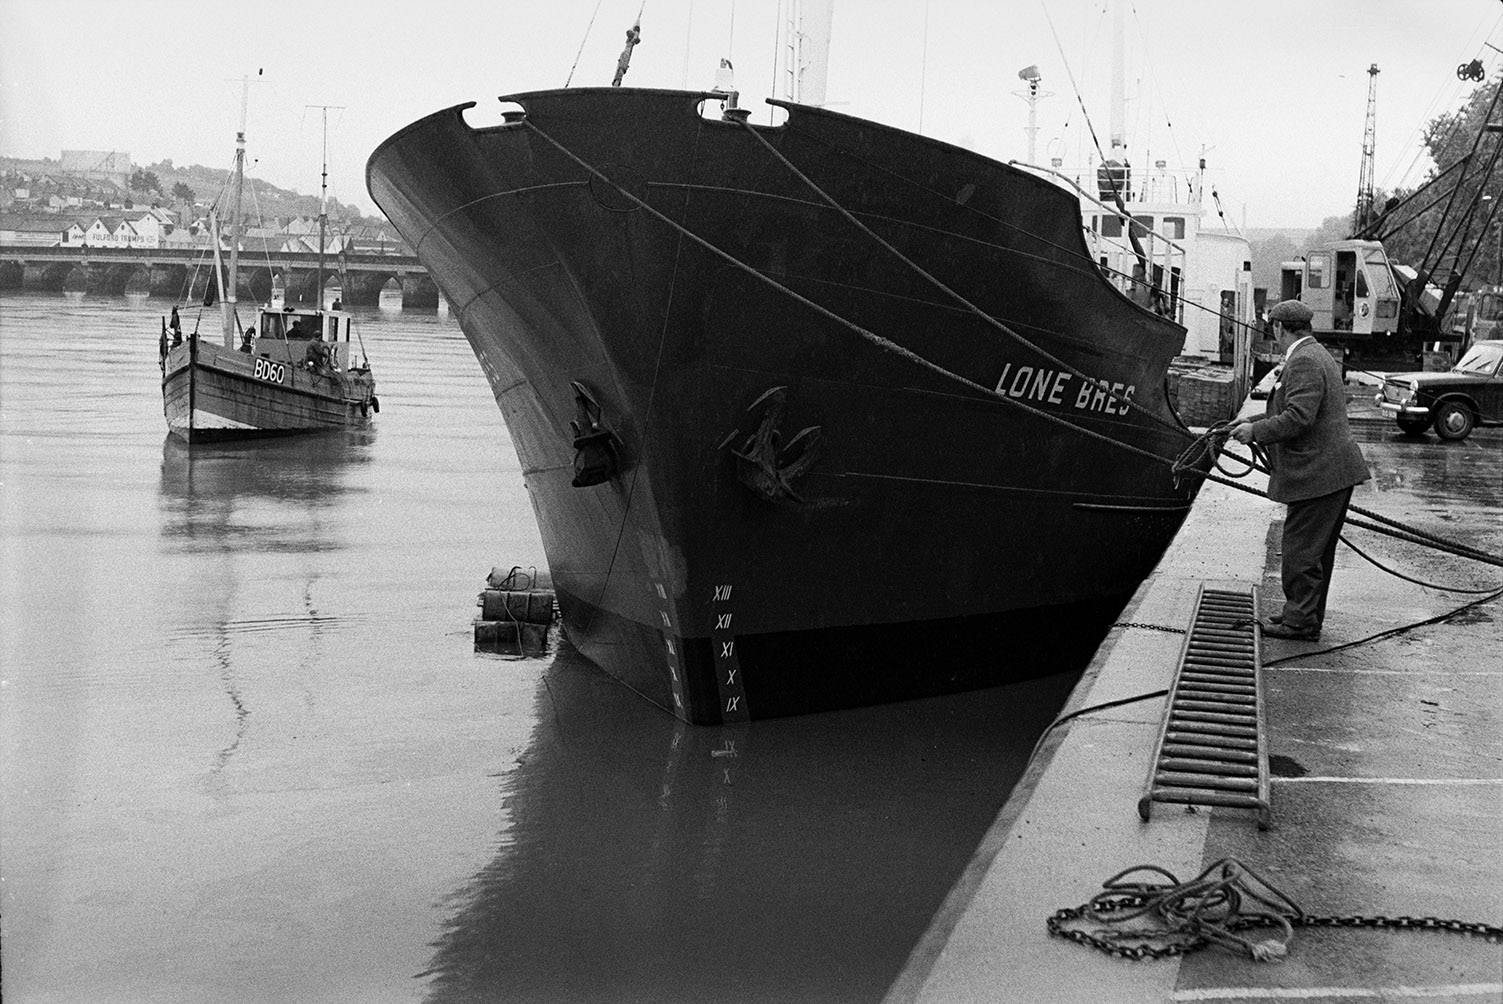 The ship 'Lone Bres' moored against the quayside at Bideford with a man stood by a ladder and holding ropes attached to the ship. A crane is on the quay ready to unload her cargo. A fishing boat can be seen on the River Torridge in the background, as well as Bideford Long Bridge, also known as Bideford Old Bridge.